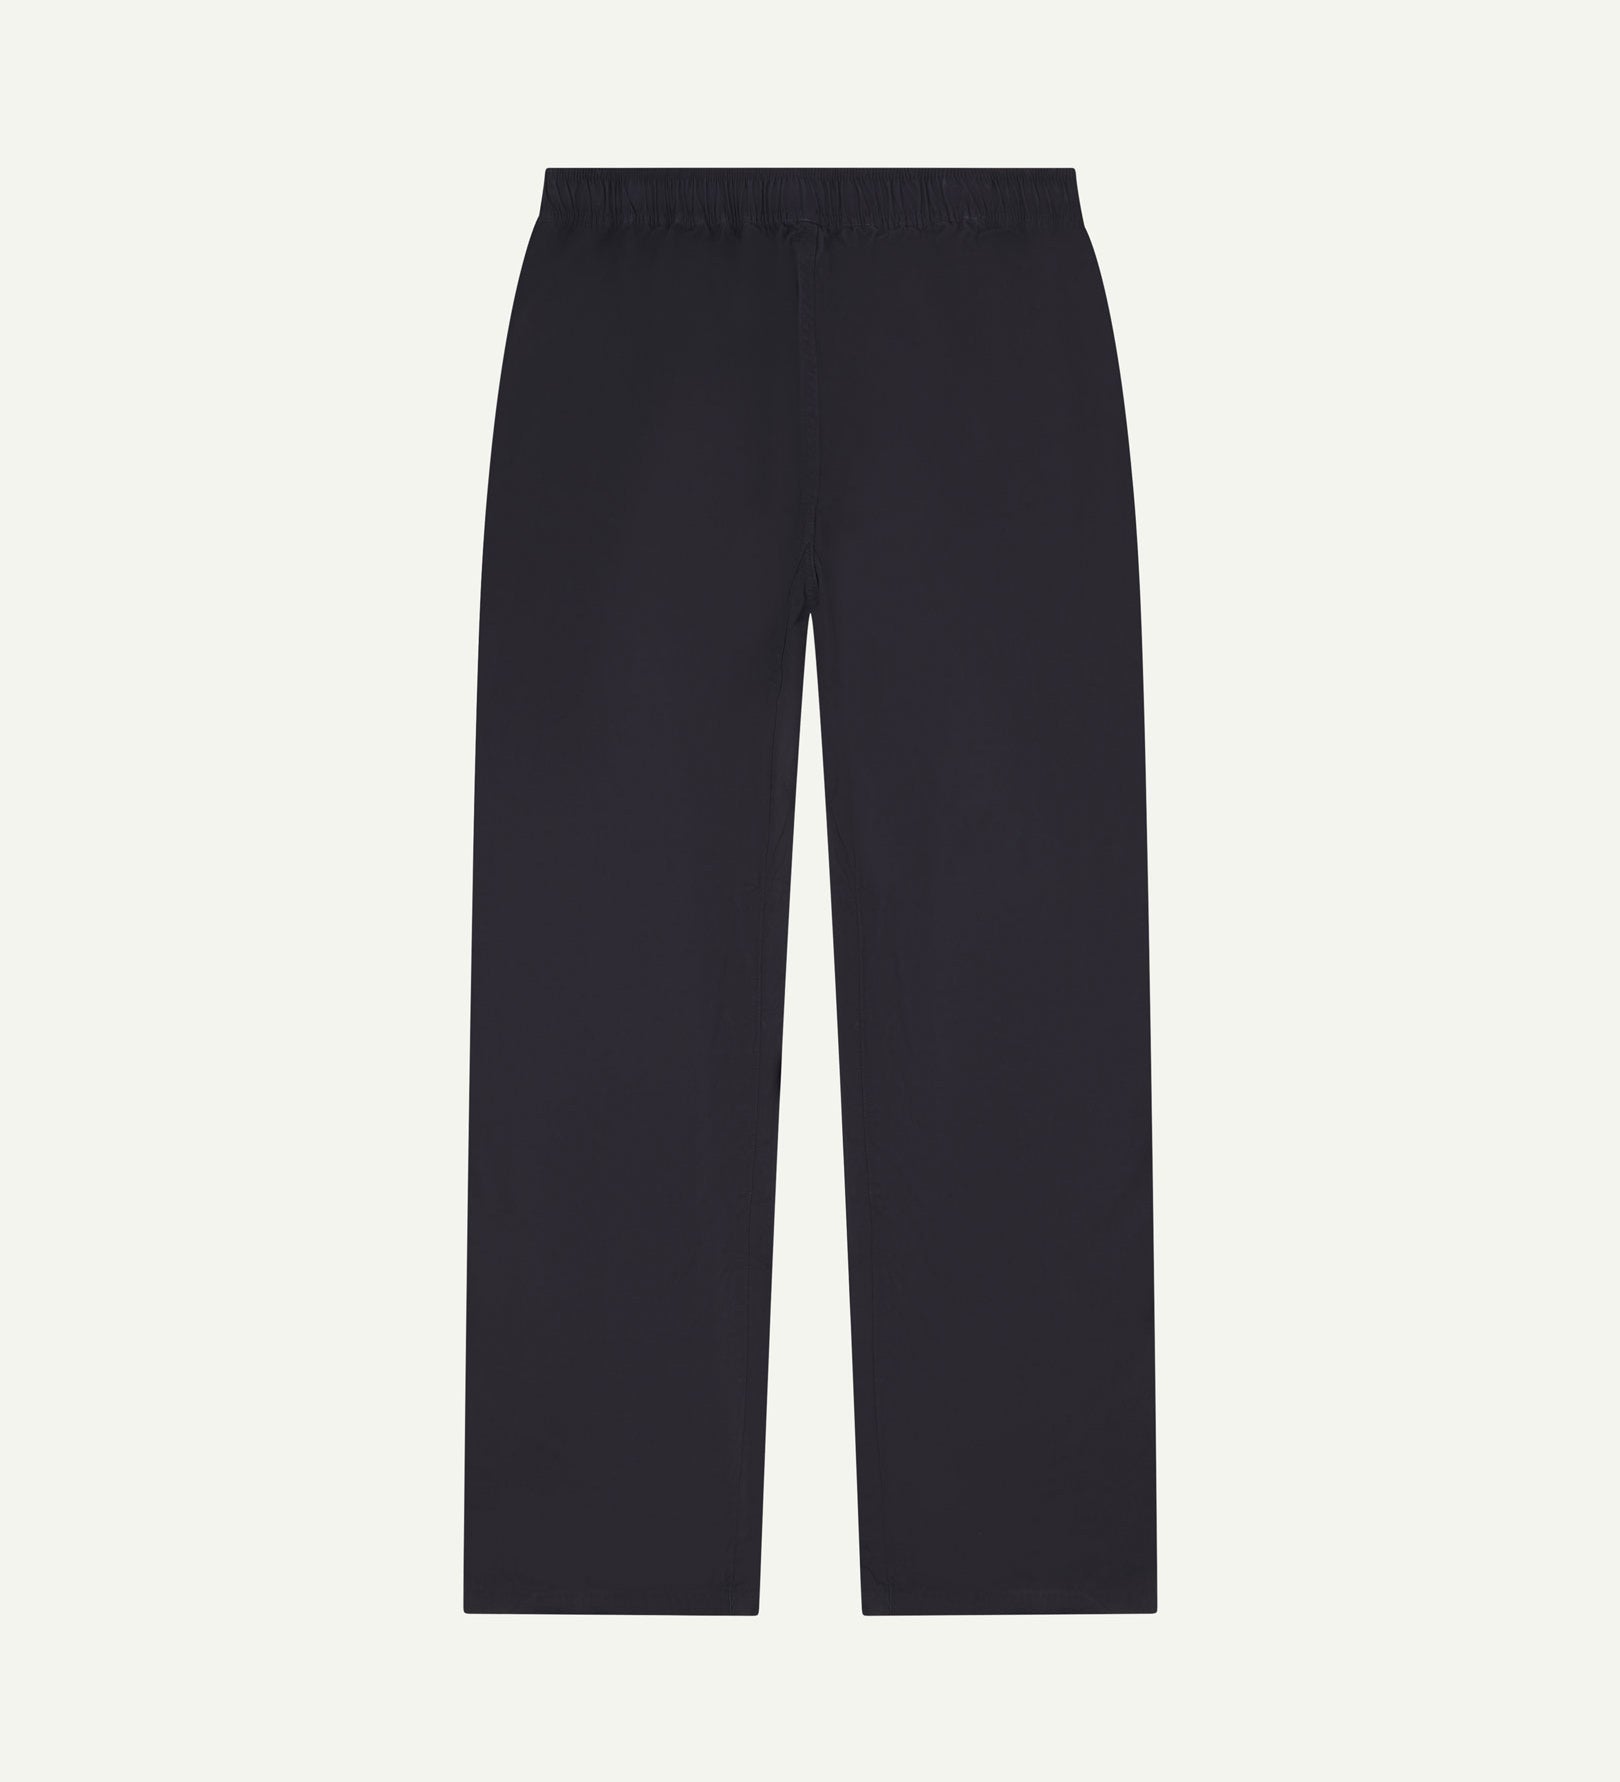 Flat back shot of the Uskees 5020 lightweight utility pants in midnight blue showing drawstring waist and slighly tapered cut.